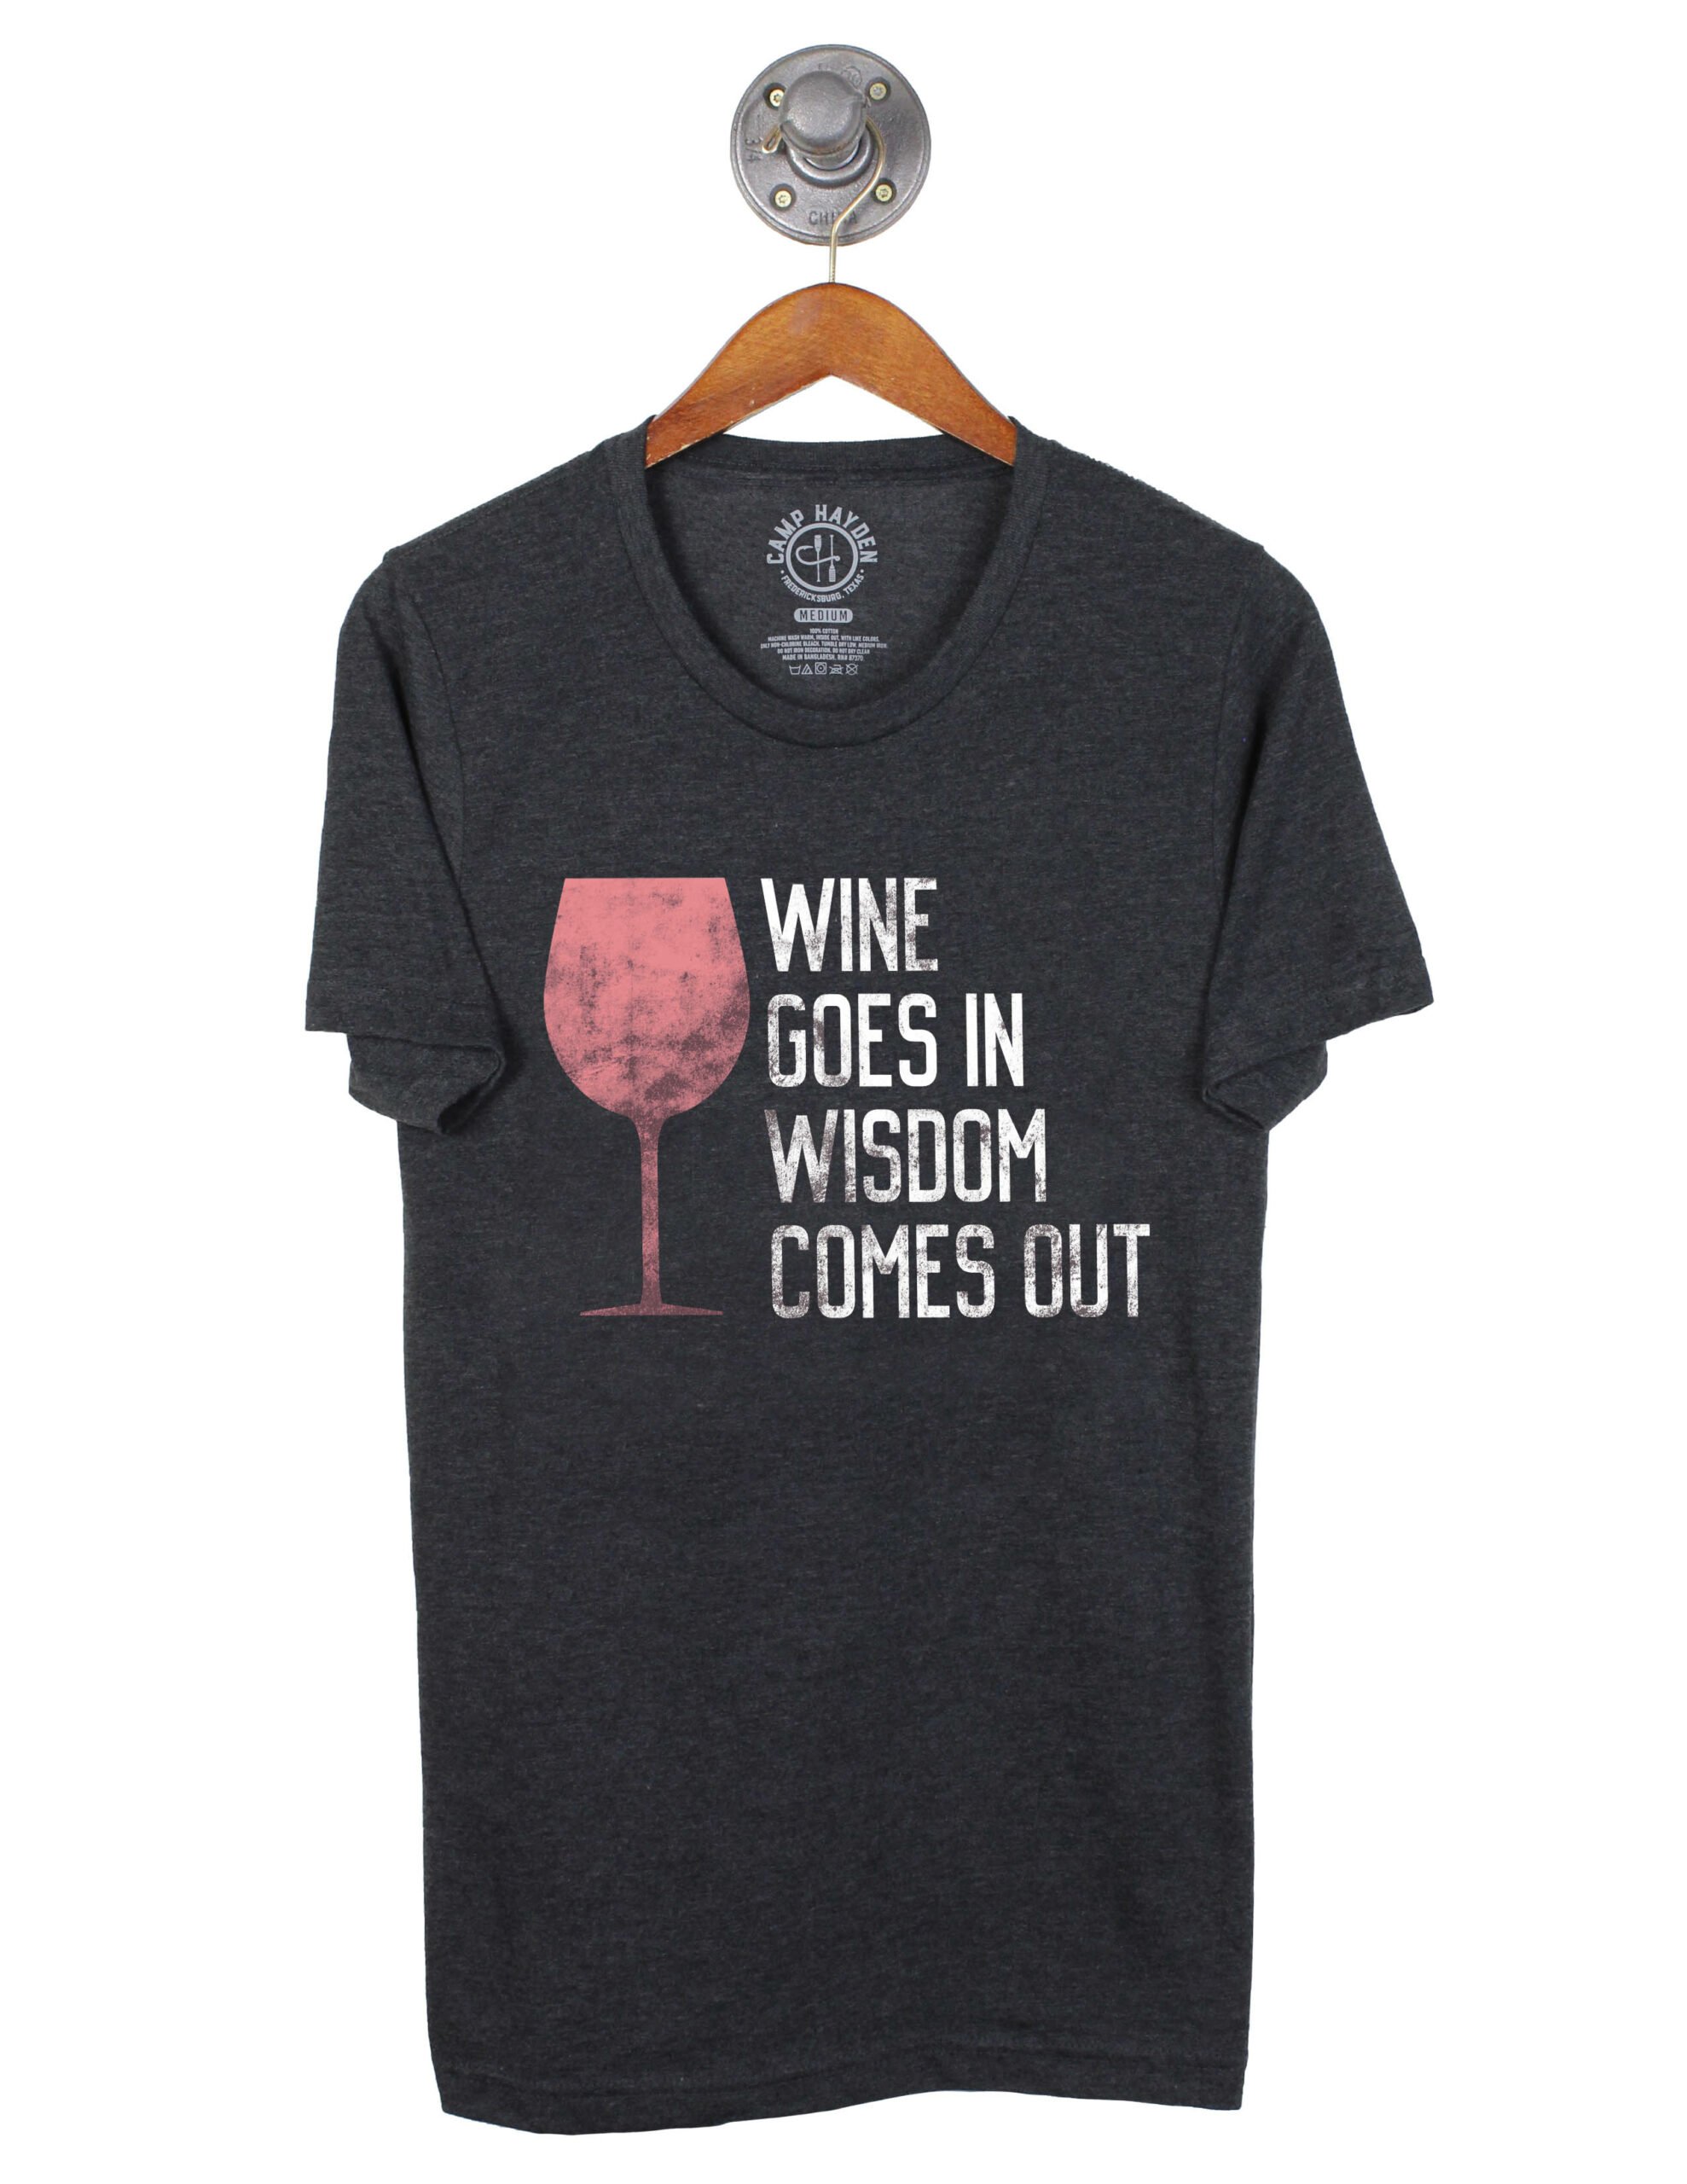 Wine Goes In Short Sleeve Tee - Barefoot Campus Outfitter